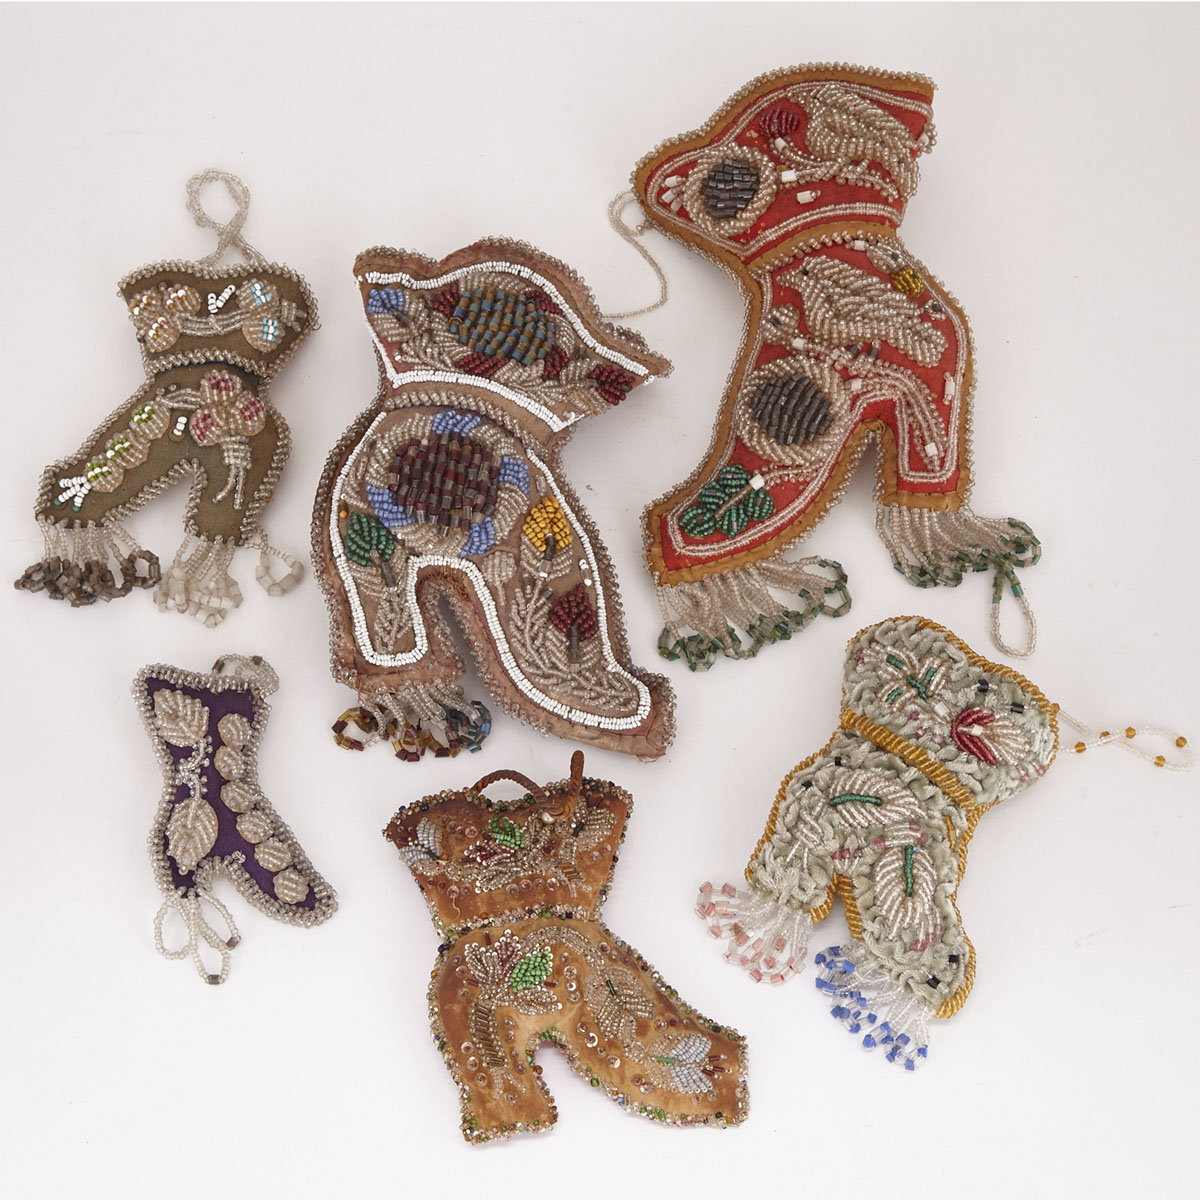 Six Iroquois Beaded Boot Form Pin Cushion Whimsies, late 19th/early 20th century